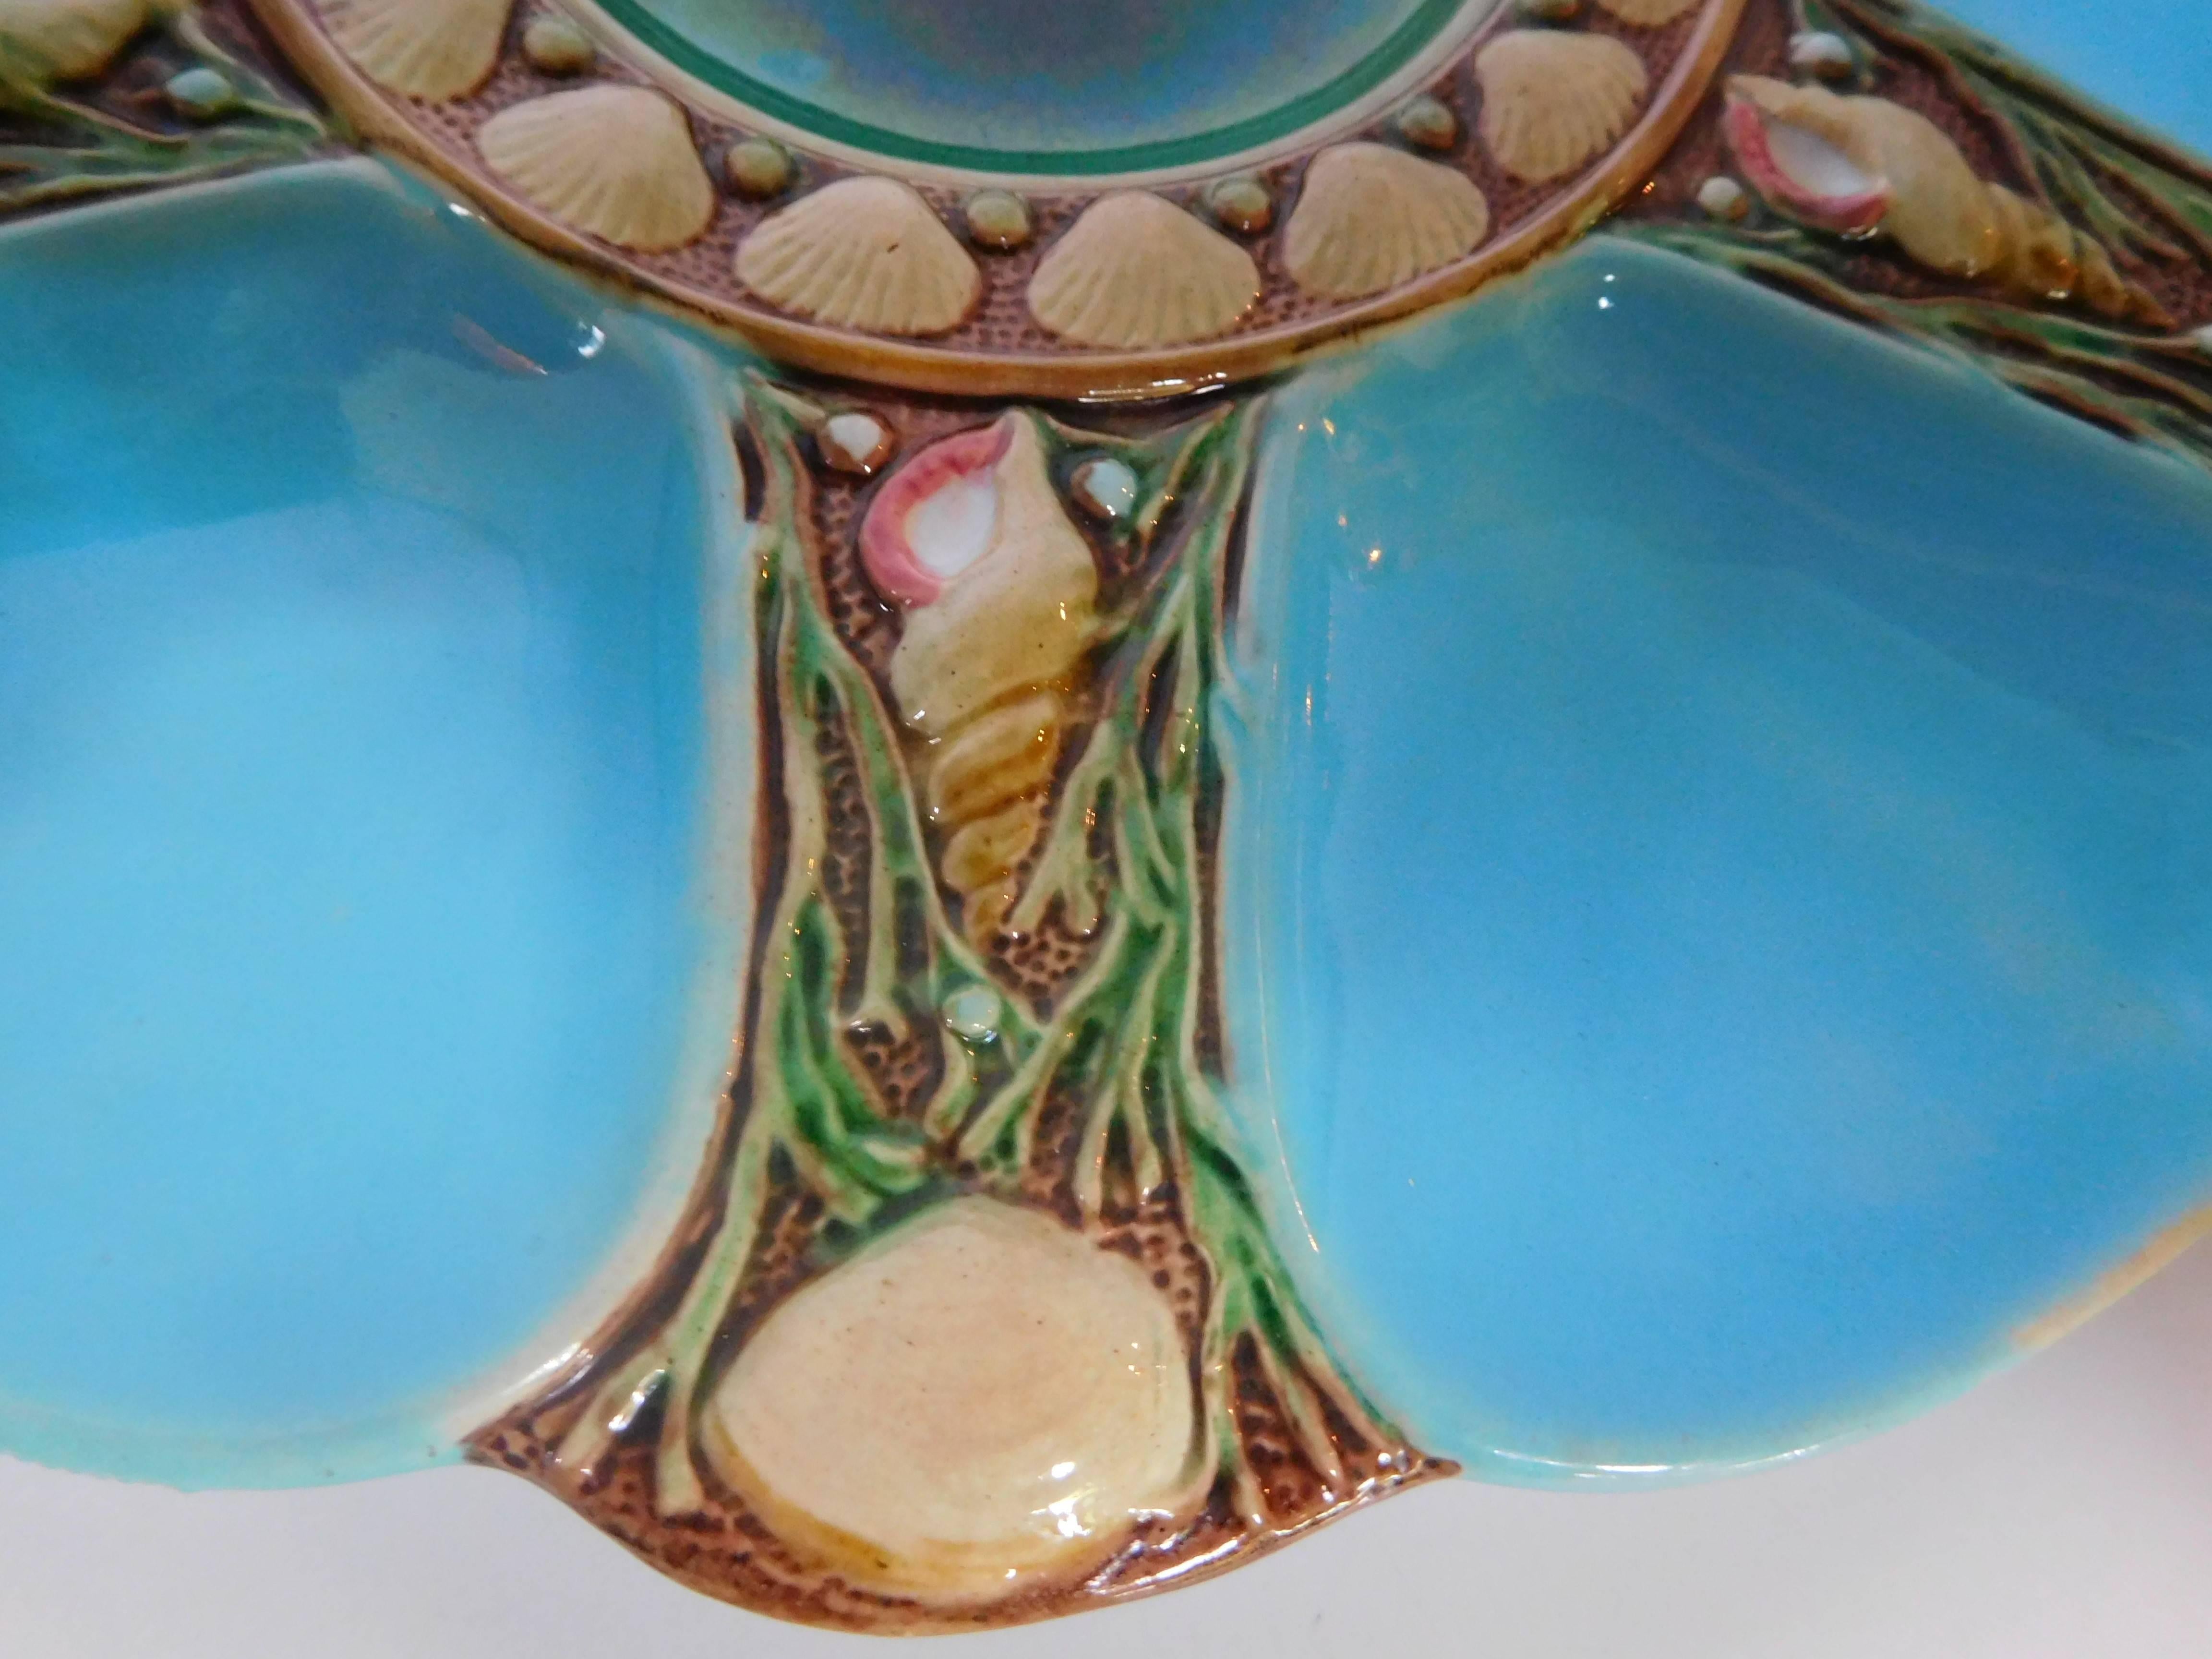 Polychromed Minton Majolica Oyster Plate in Turquoise and Green, England, 1868